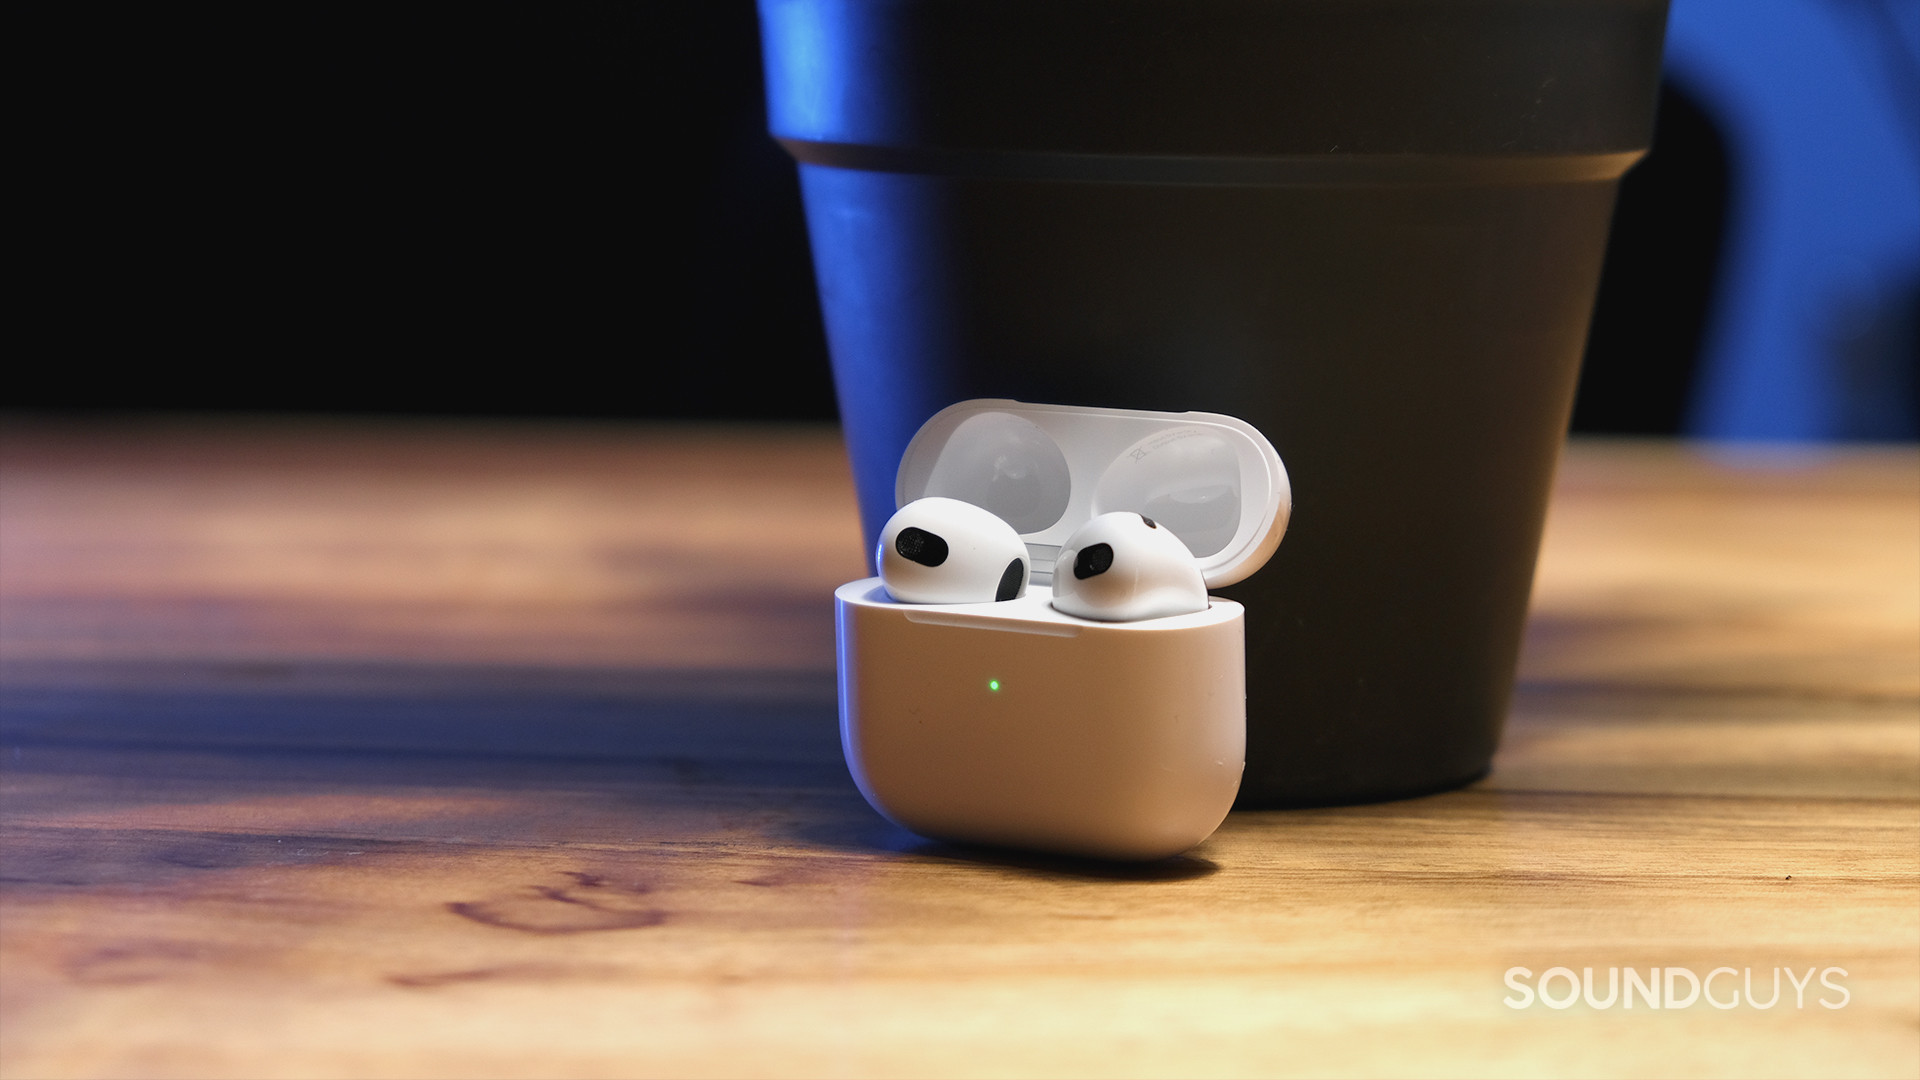 AirPods 3rd Generation in the case showing a green light on the case.